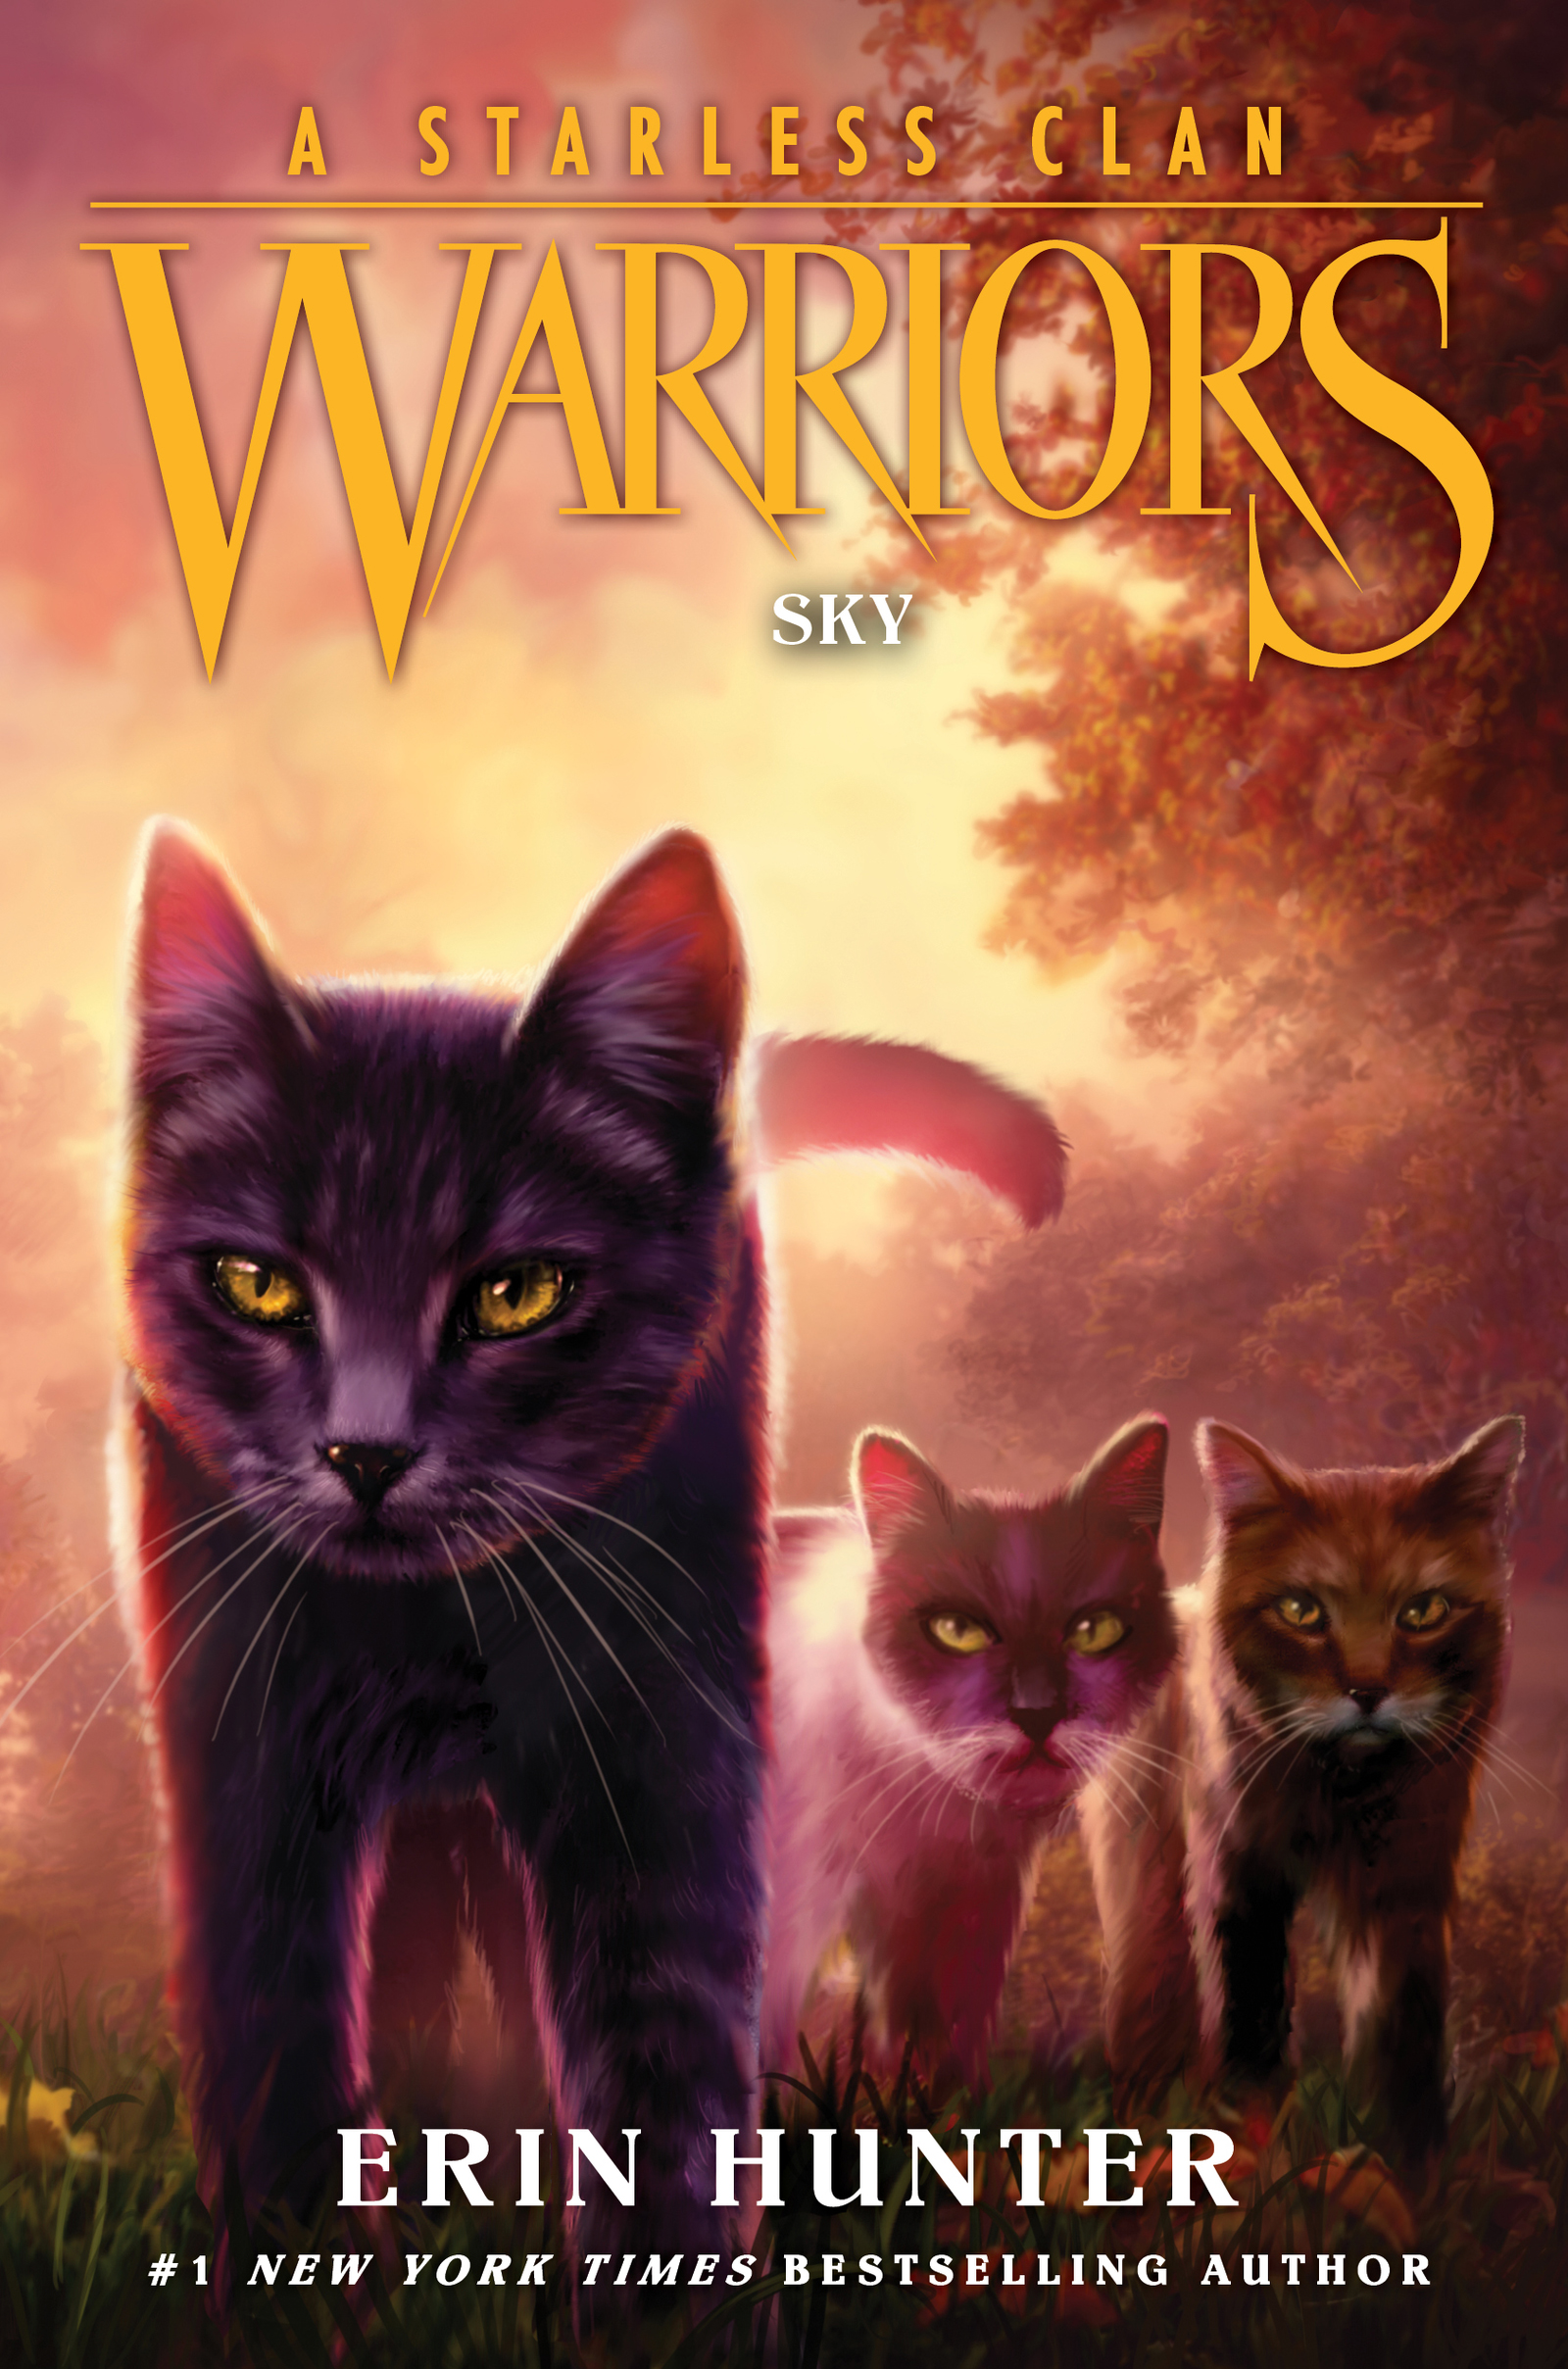 What Are Your Thoughts on the Warrior Cats Movie?